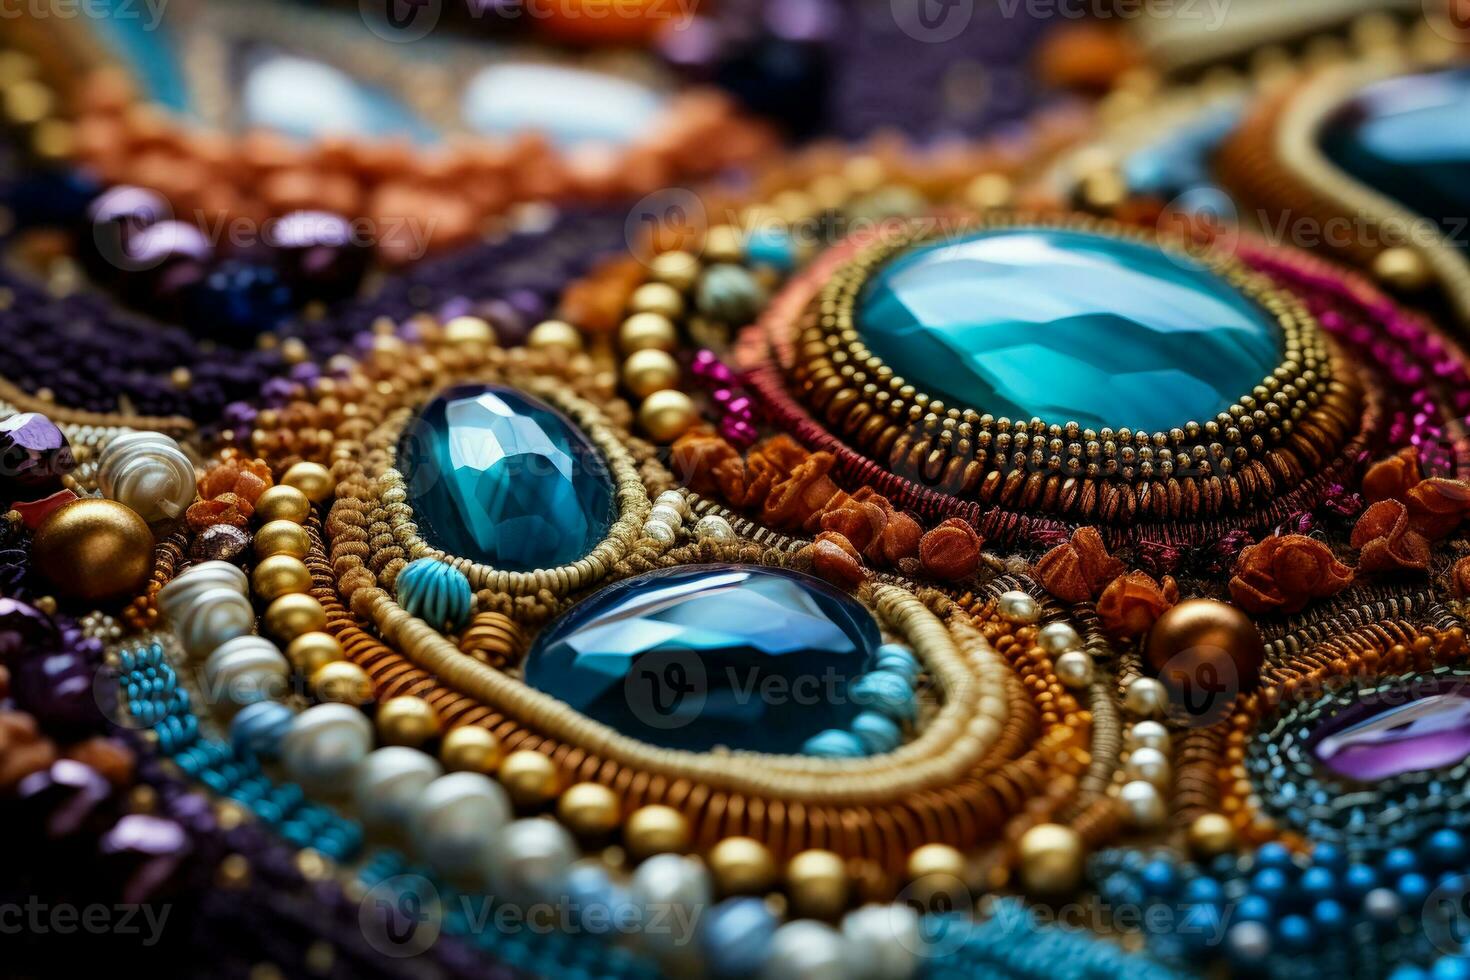 Macro photography showcasing bead embroidery details on diverse textile backgrounds photo